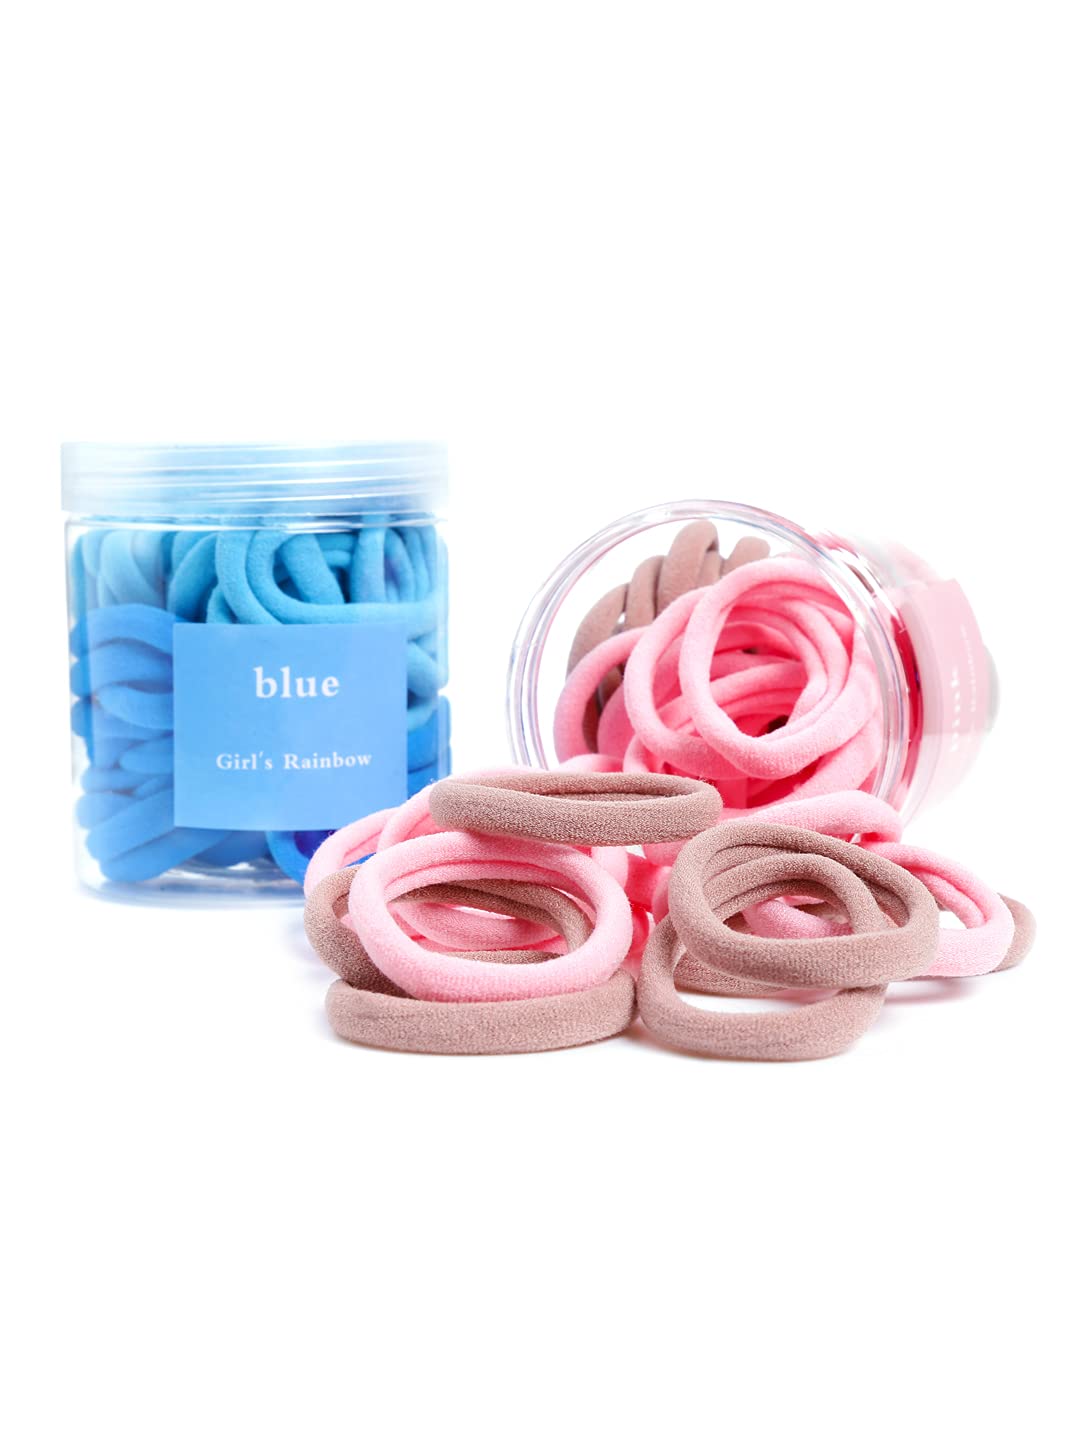 Melbees By Yellow Chimes Rubber Bands for Girls 100 Pcs Multicolor Rubberbands Elastic Hair Ties Hair Bands Ponytail Holders with Storage Box Hair Accessories.